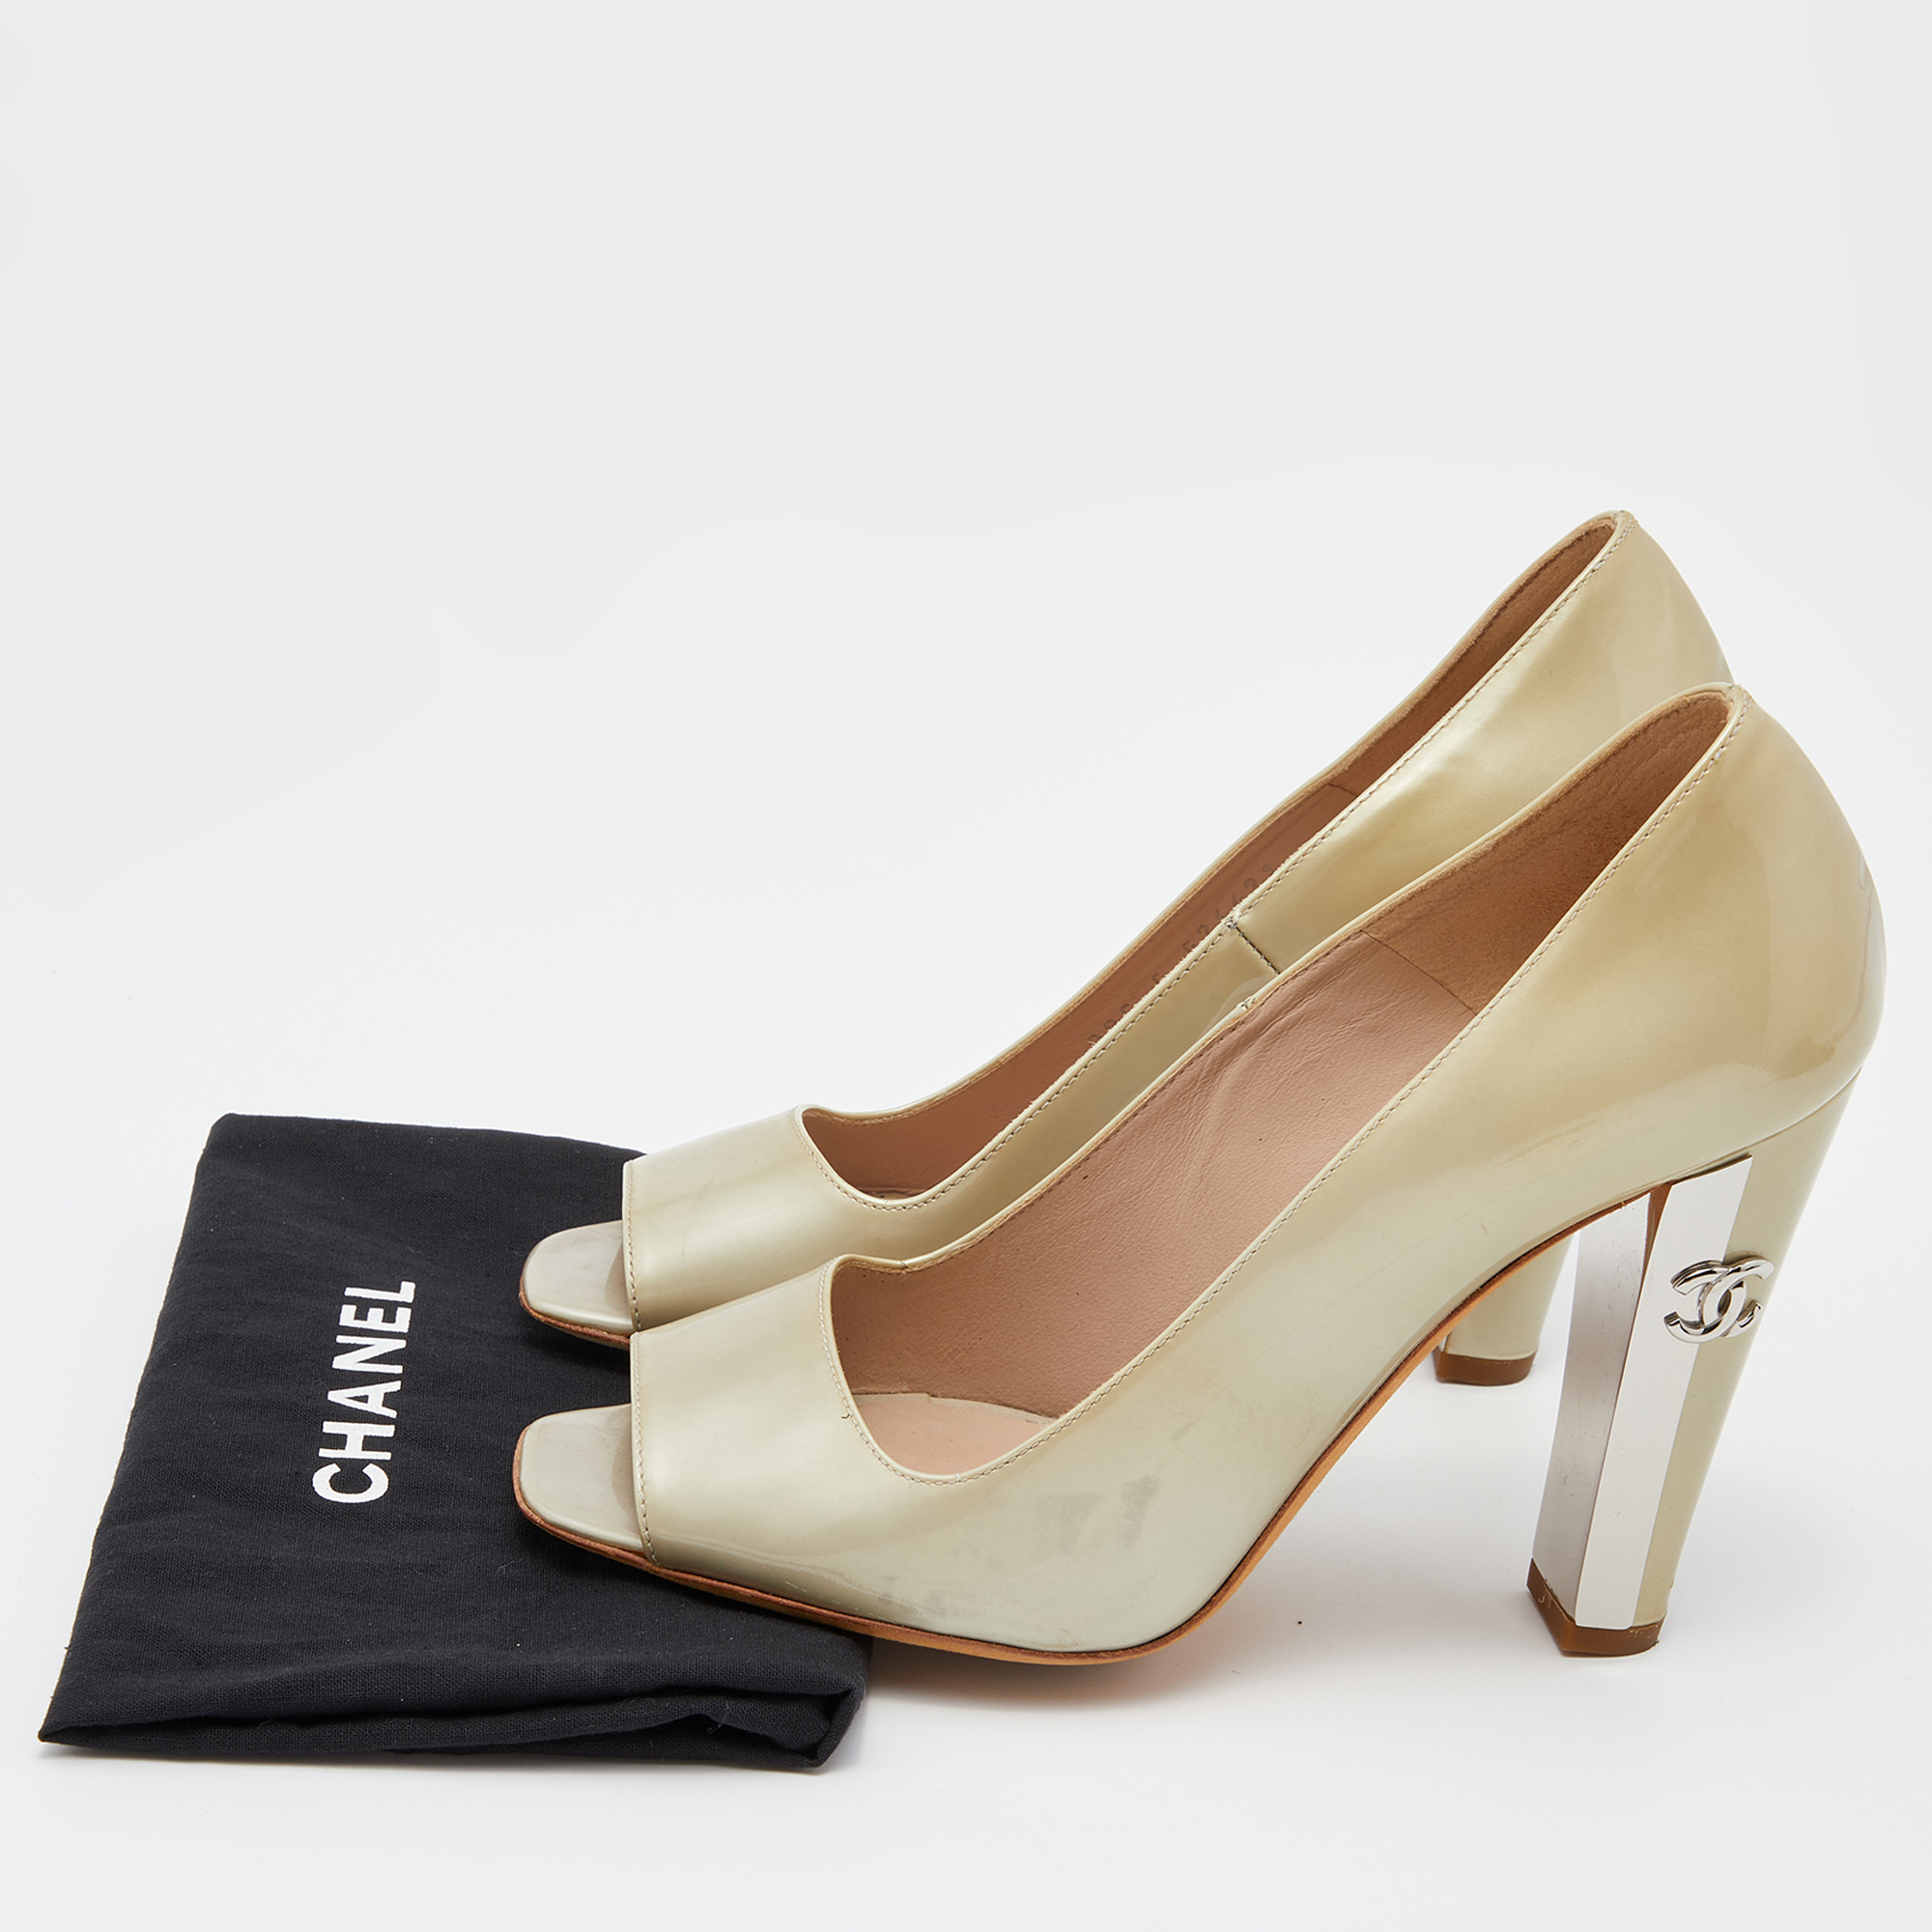 Chanel Pale Green Leather CC Open Toe Pumps Size 36.5